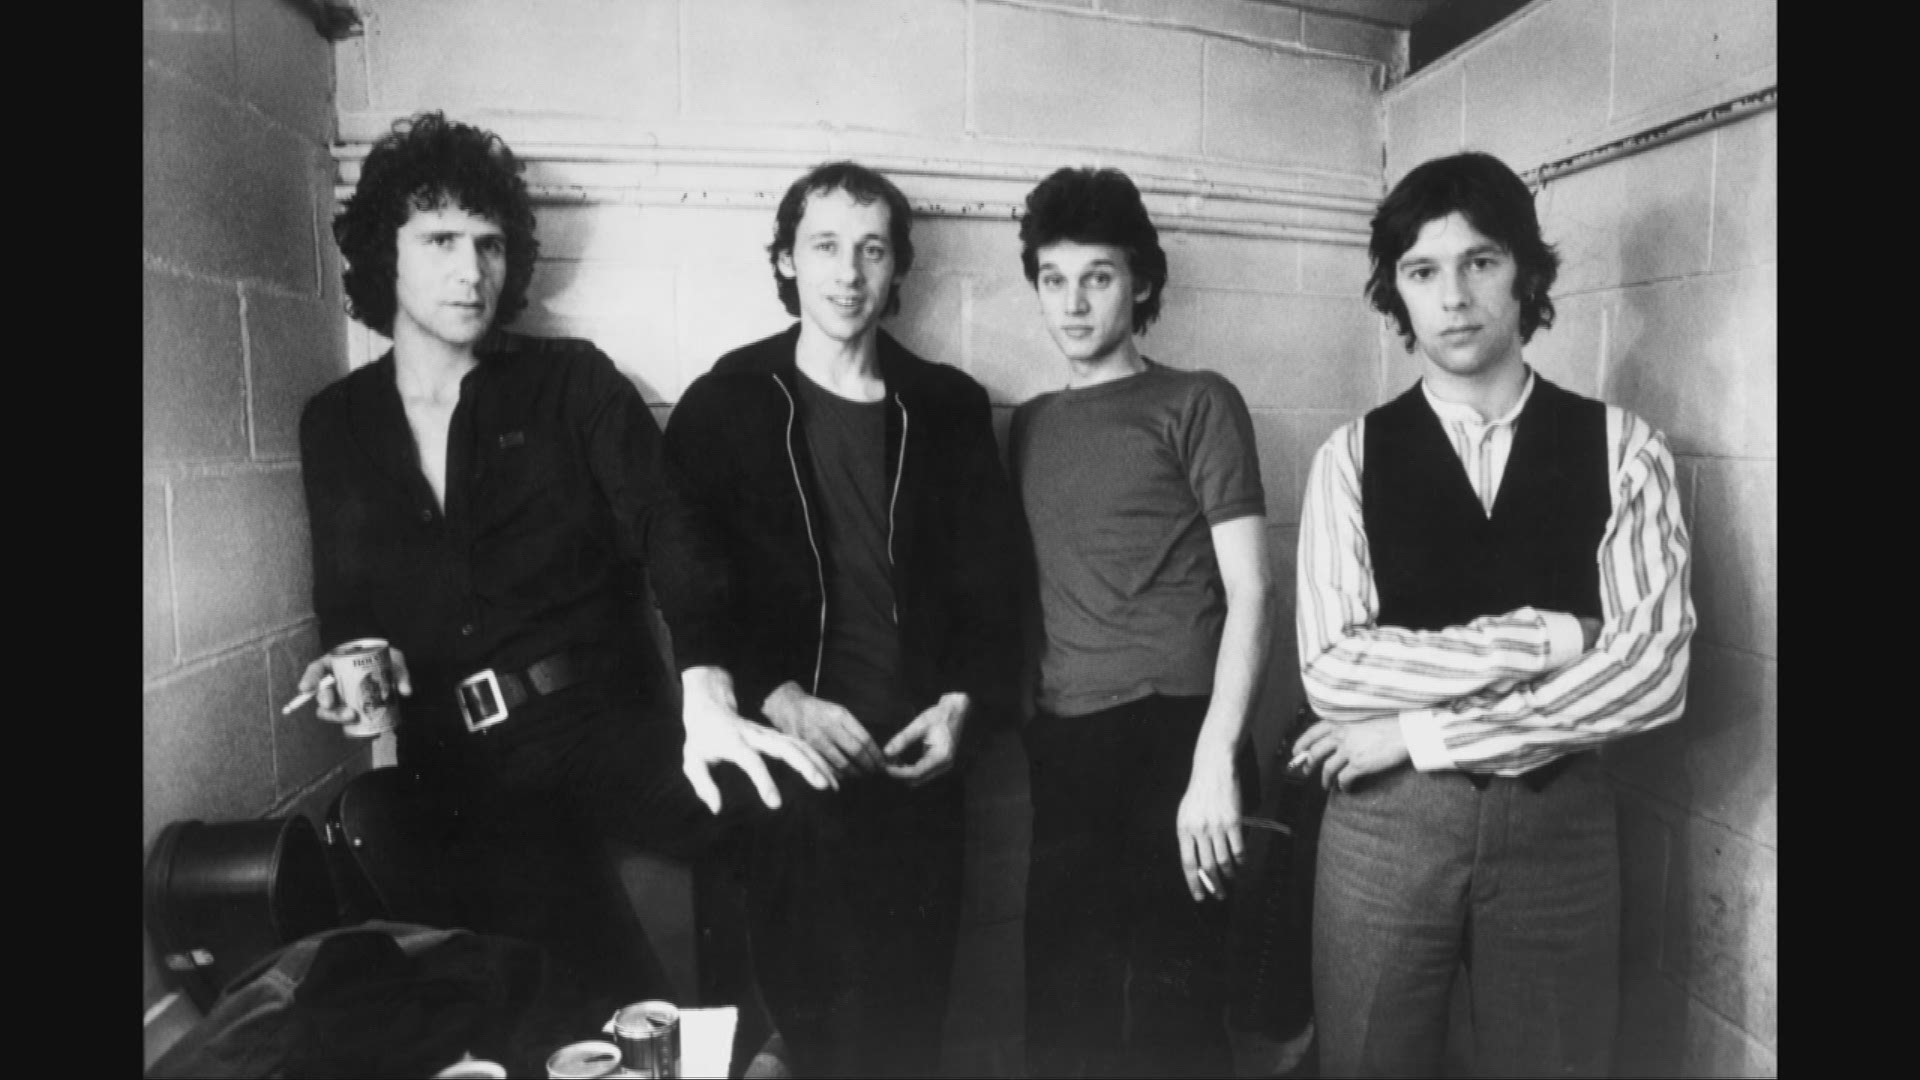 April 13, 2018: When Dire Straits is formally inducted into the Rock and Roll Hall of Fame in Cleveland, one of the band's founders says he won't be there. David Knopfler posted on Facebook that he won't be attending the ceremony in Cleveland because the 